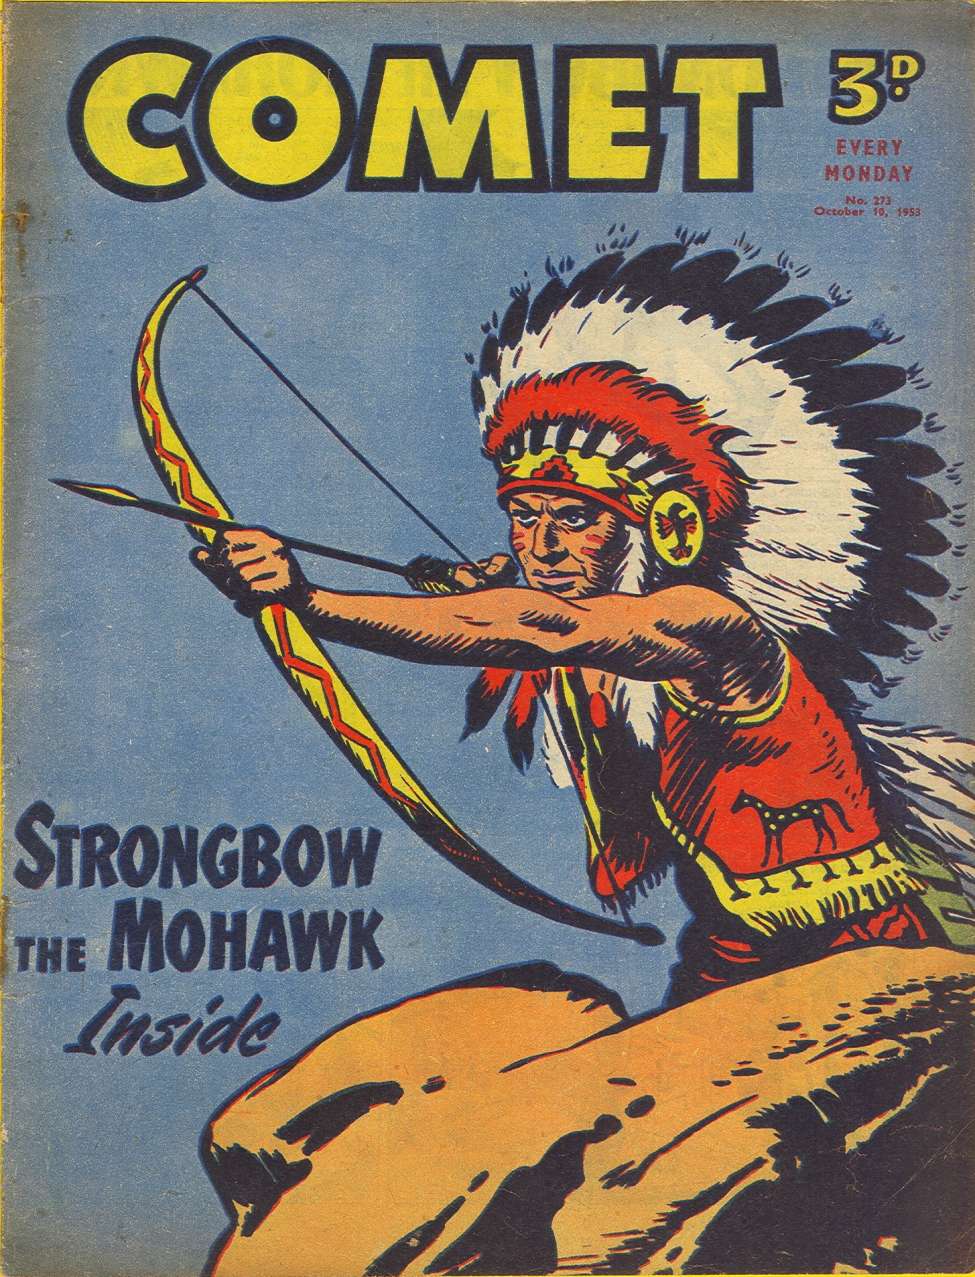 Comic Book Cover For The Comet 273